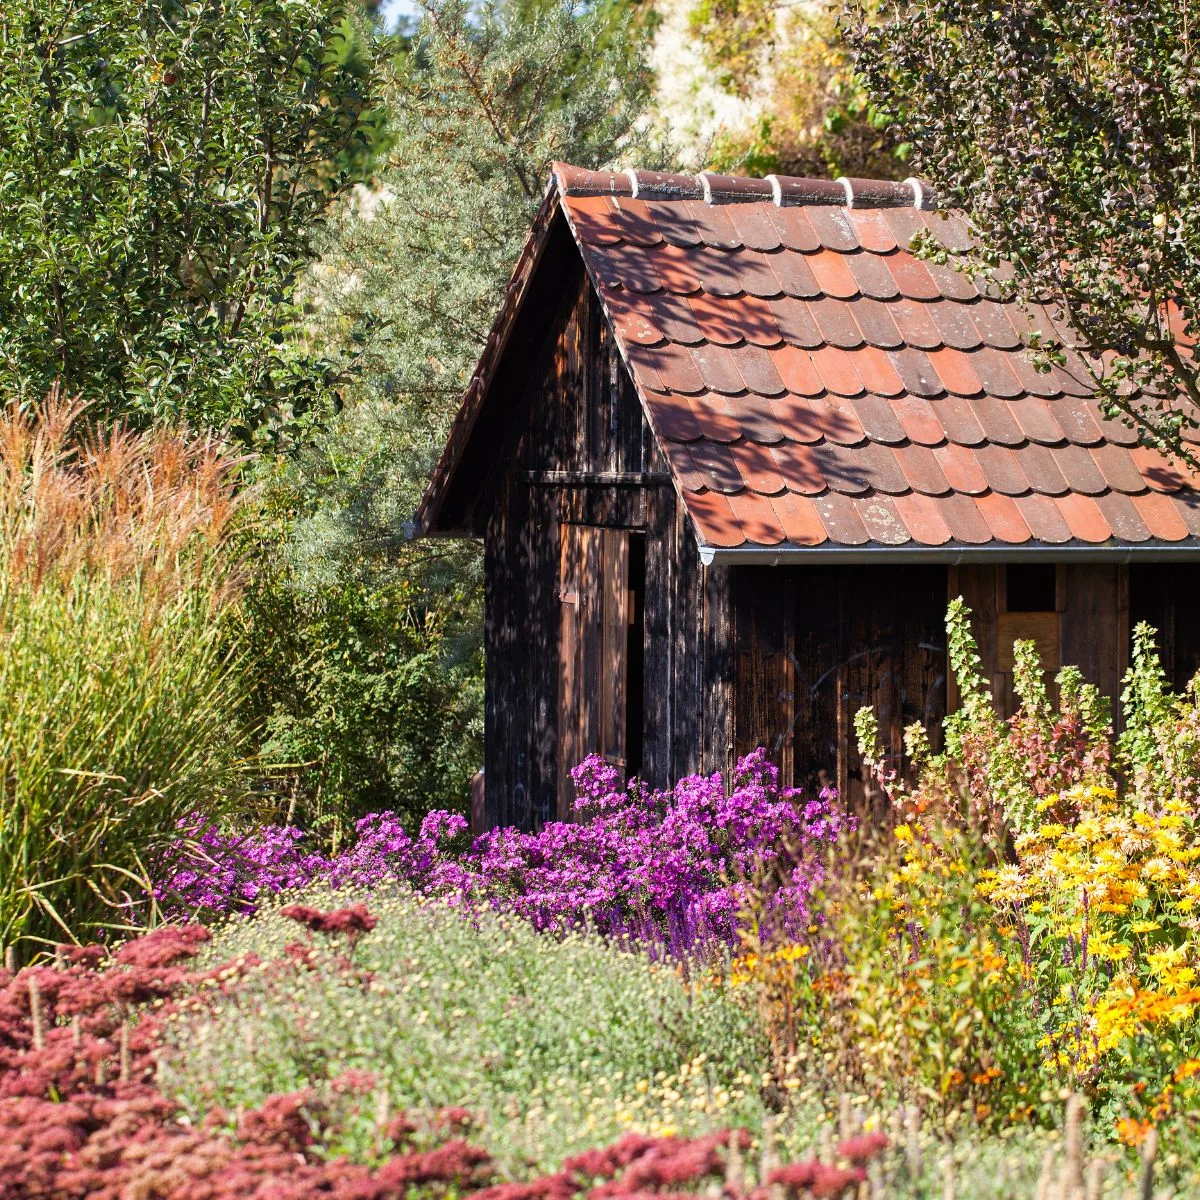 Wooden shed surrounded by beautiful cottage style flowers